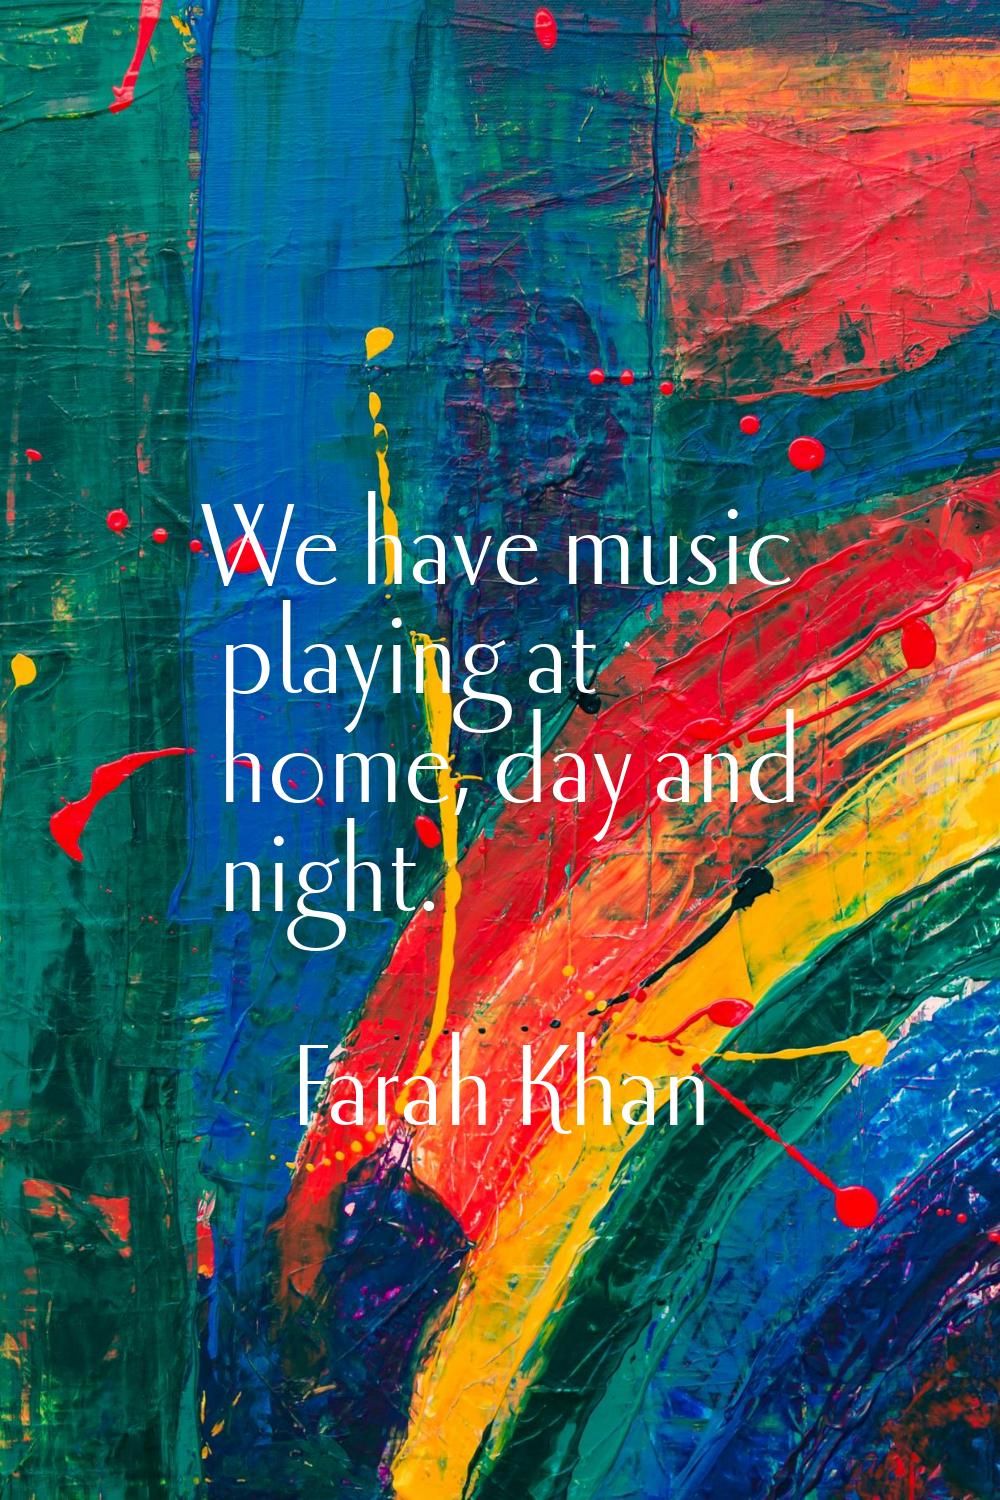 We have music playing at home, day and night.